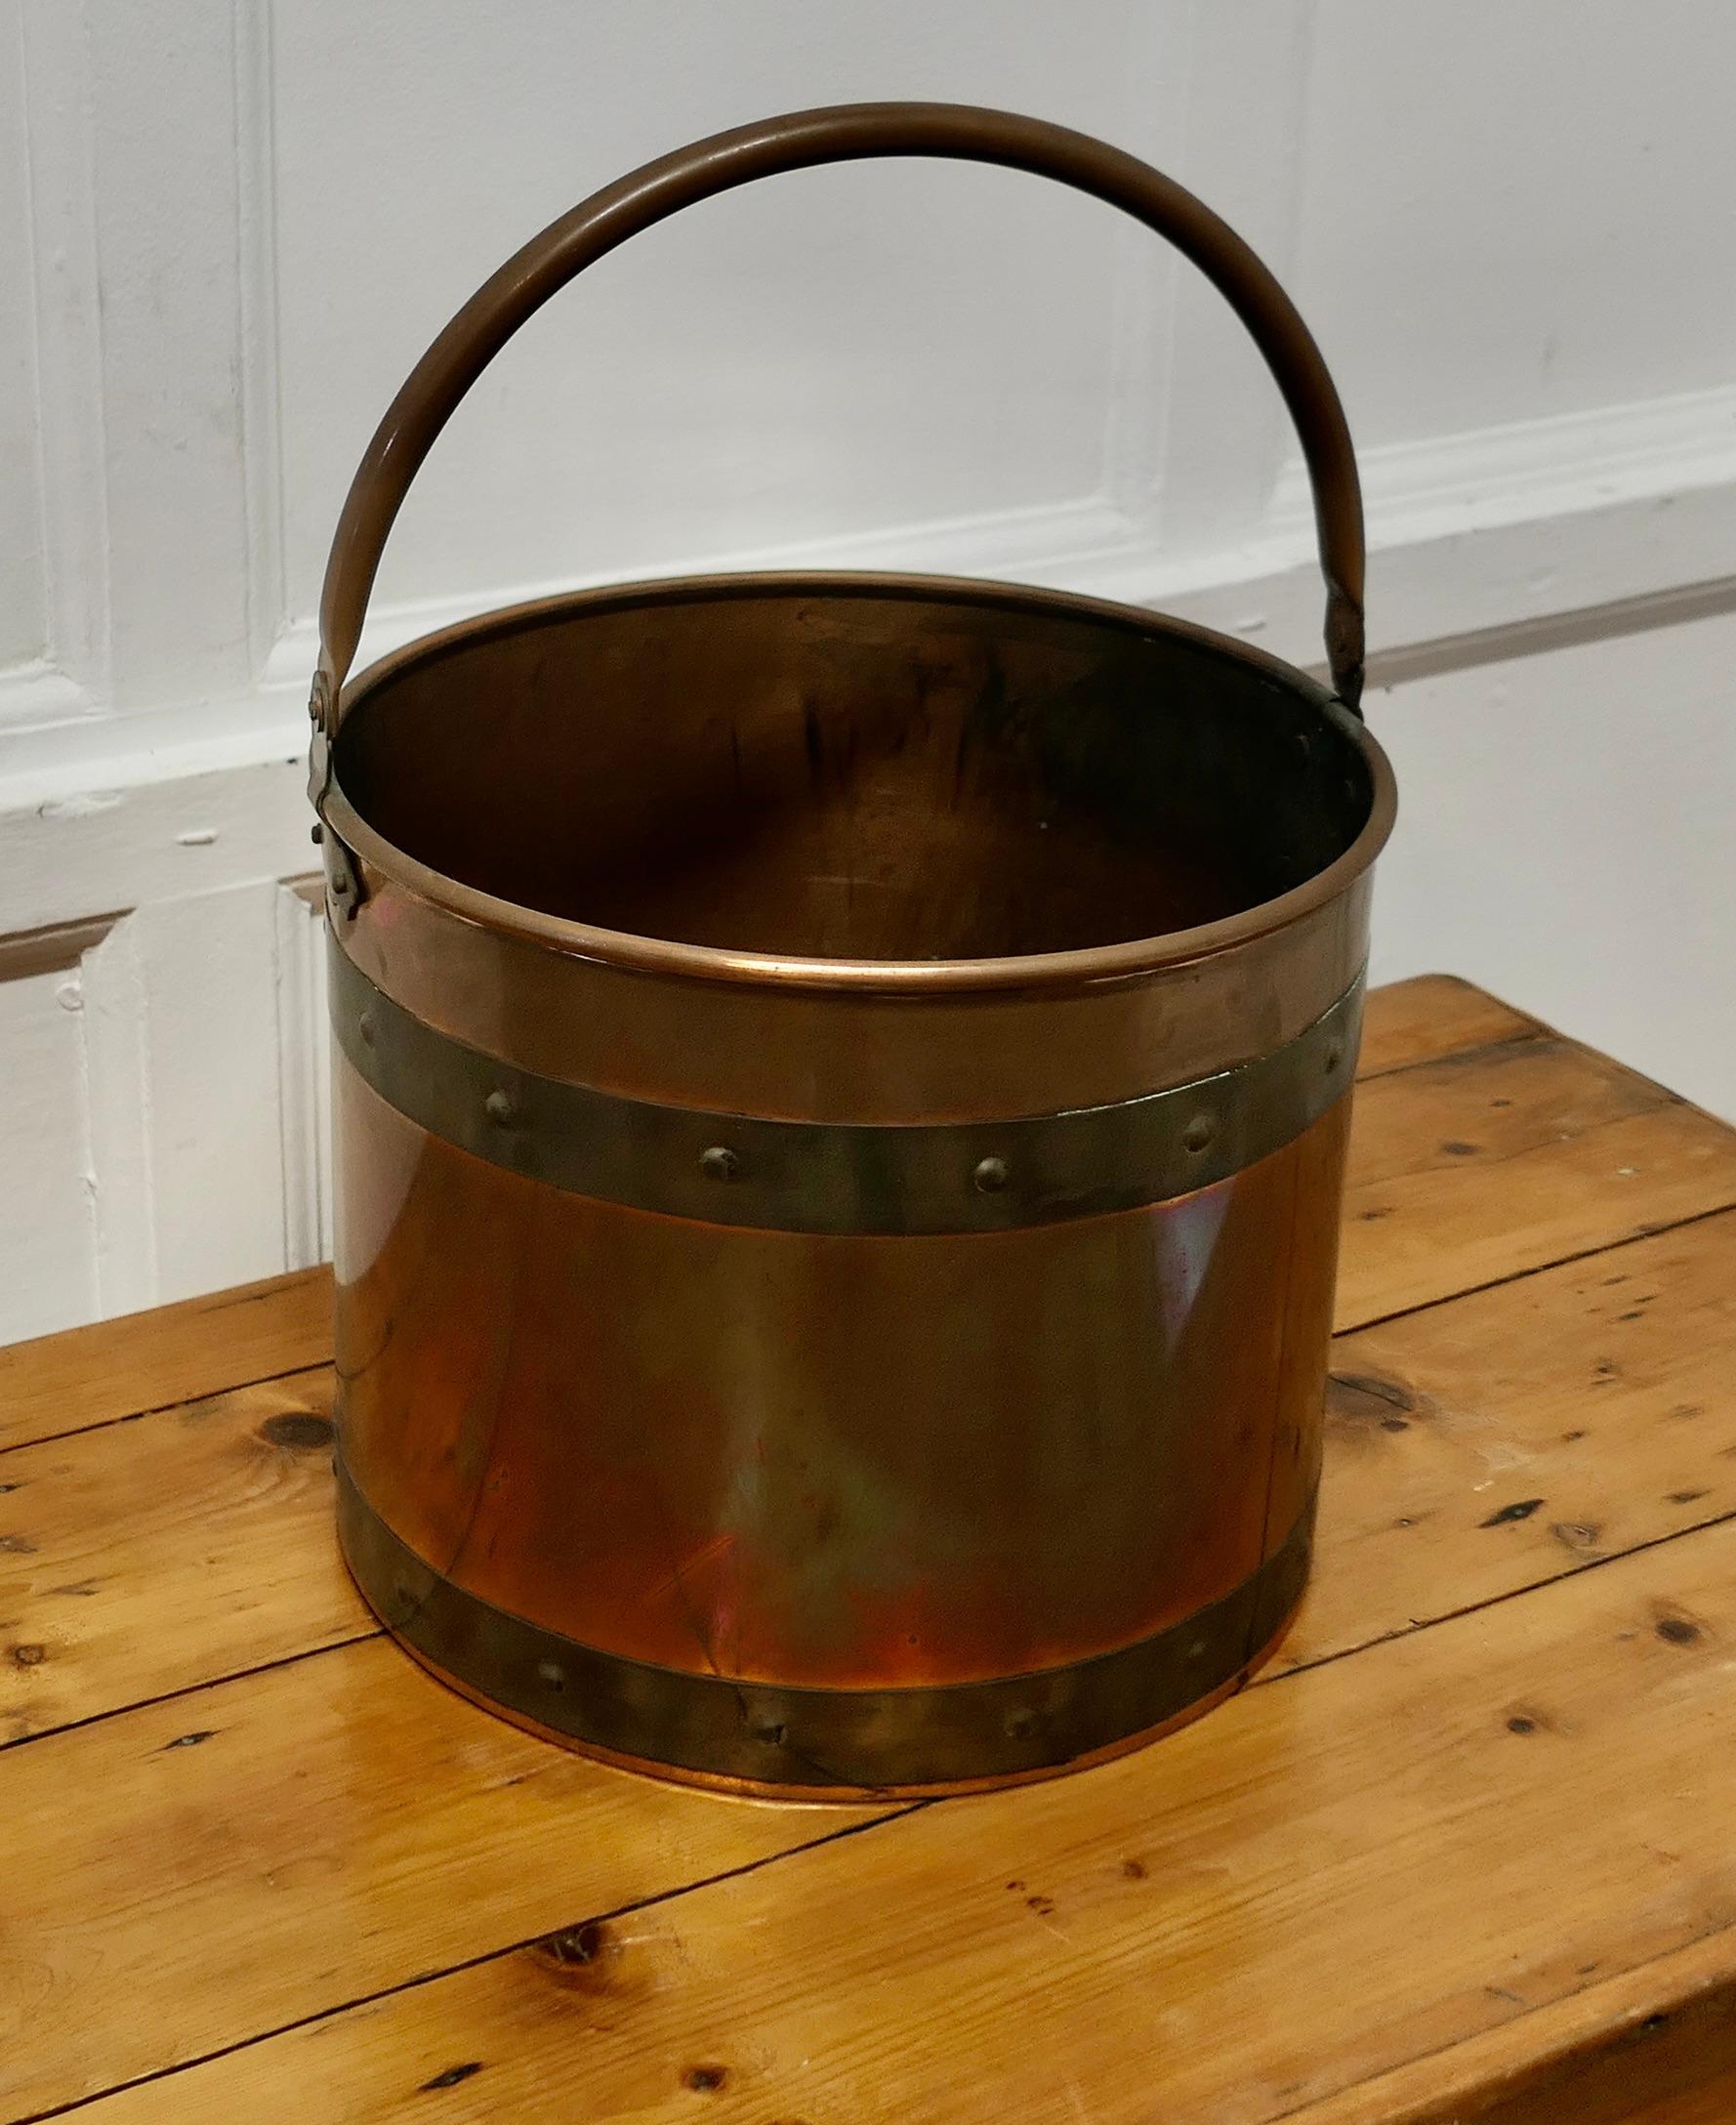 Riveted Copper and Brass Coal Bucket 

This is a lovely strong copper coal bucket, this is a good big piece and would make a really good coal or log container and handy because it has a riveted brass carrying handle

The bucket is in good well aged